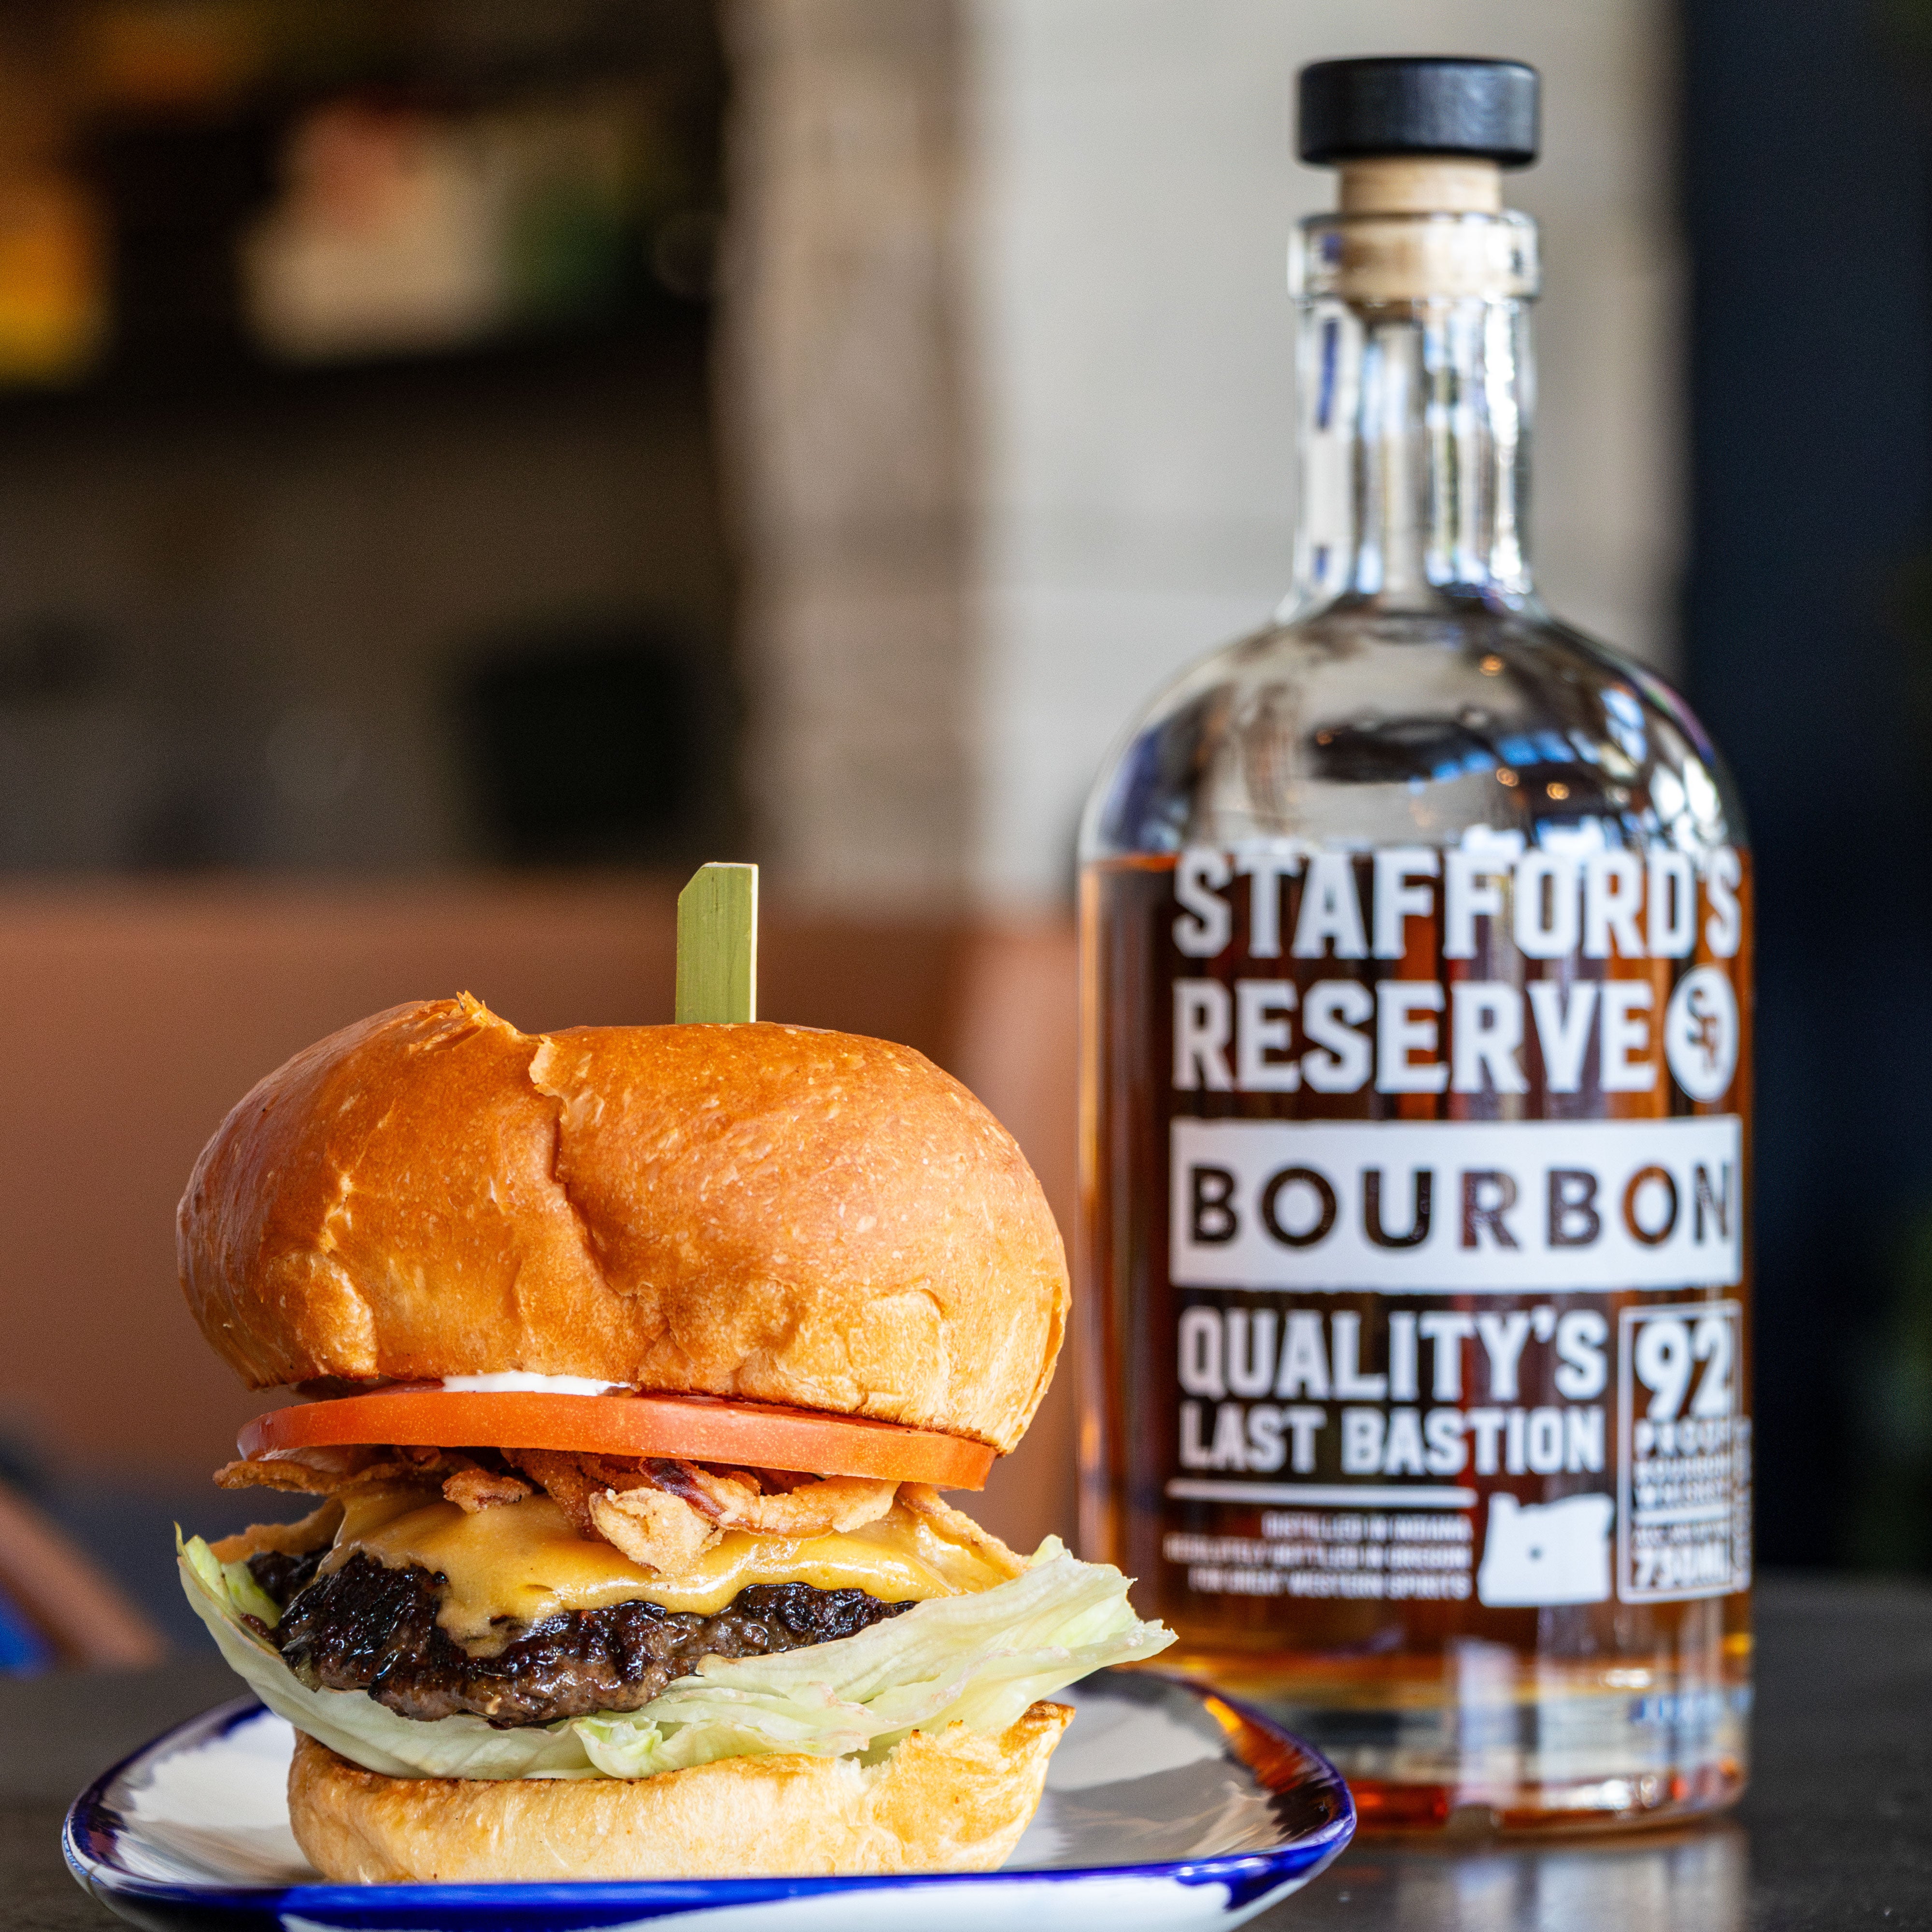 The Stafford's Reserve Burger